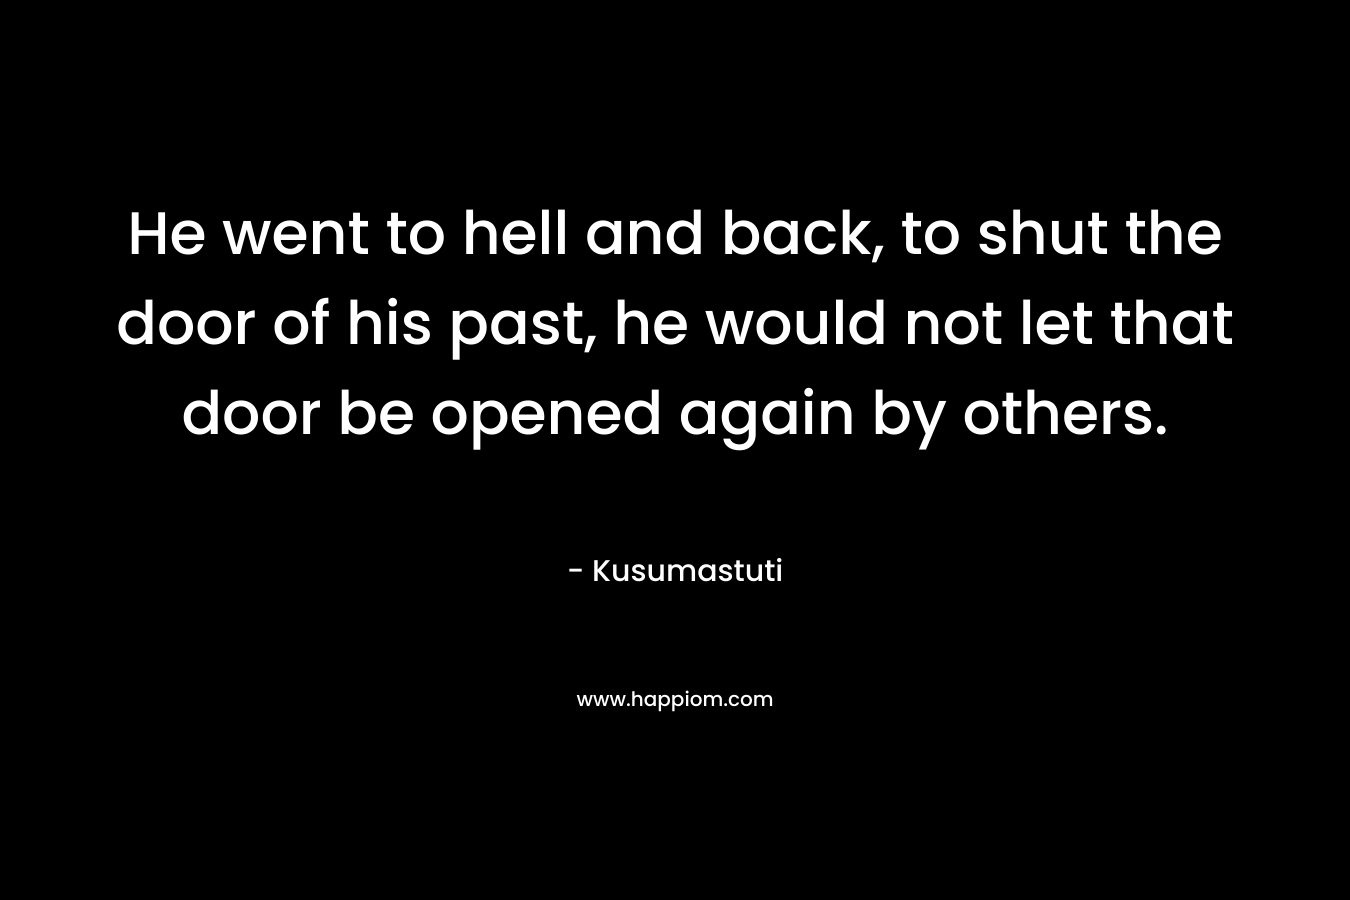 He went to hell and back, to shut the door of his past, he would not let that door be opened again by others. – Kusumastuti